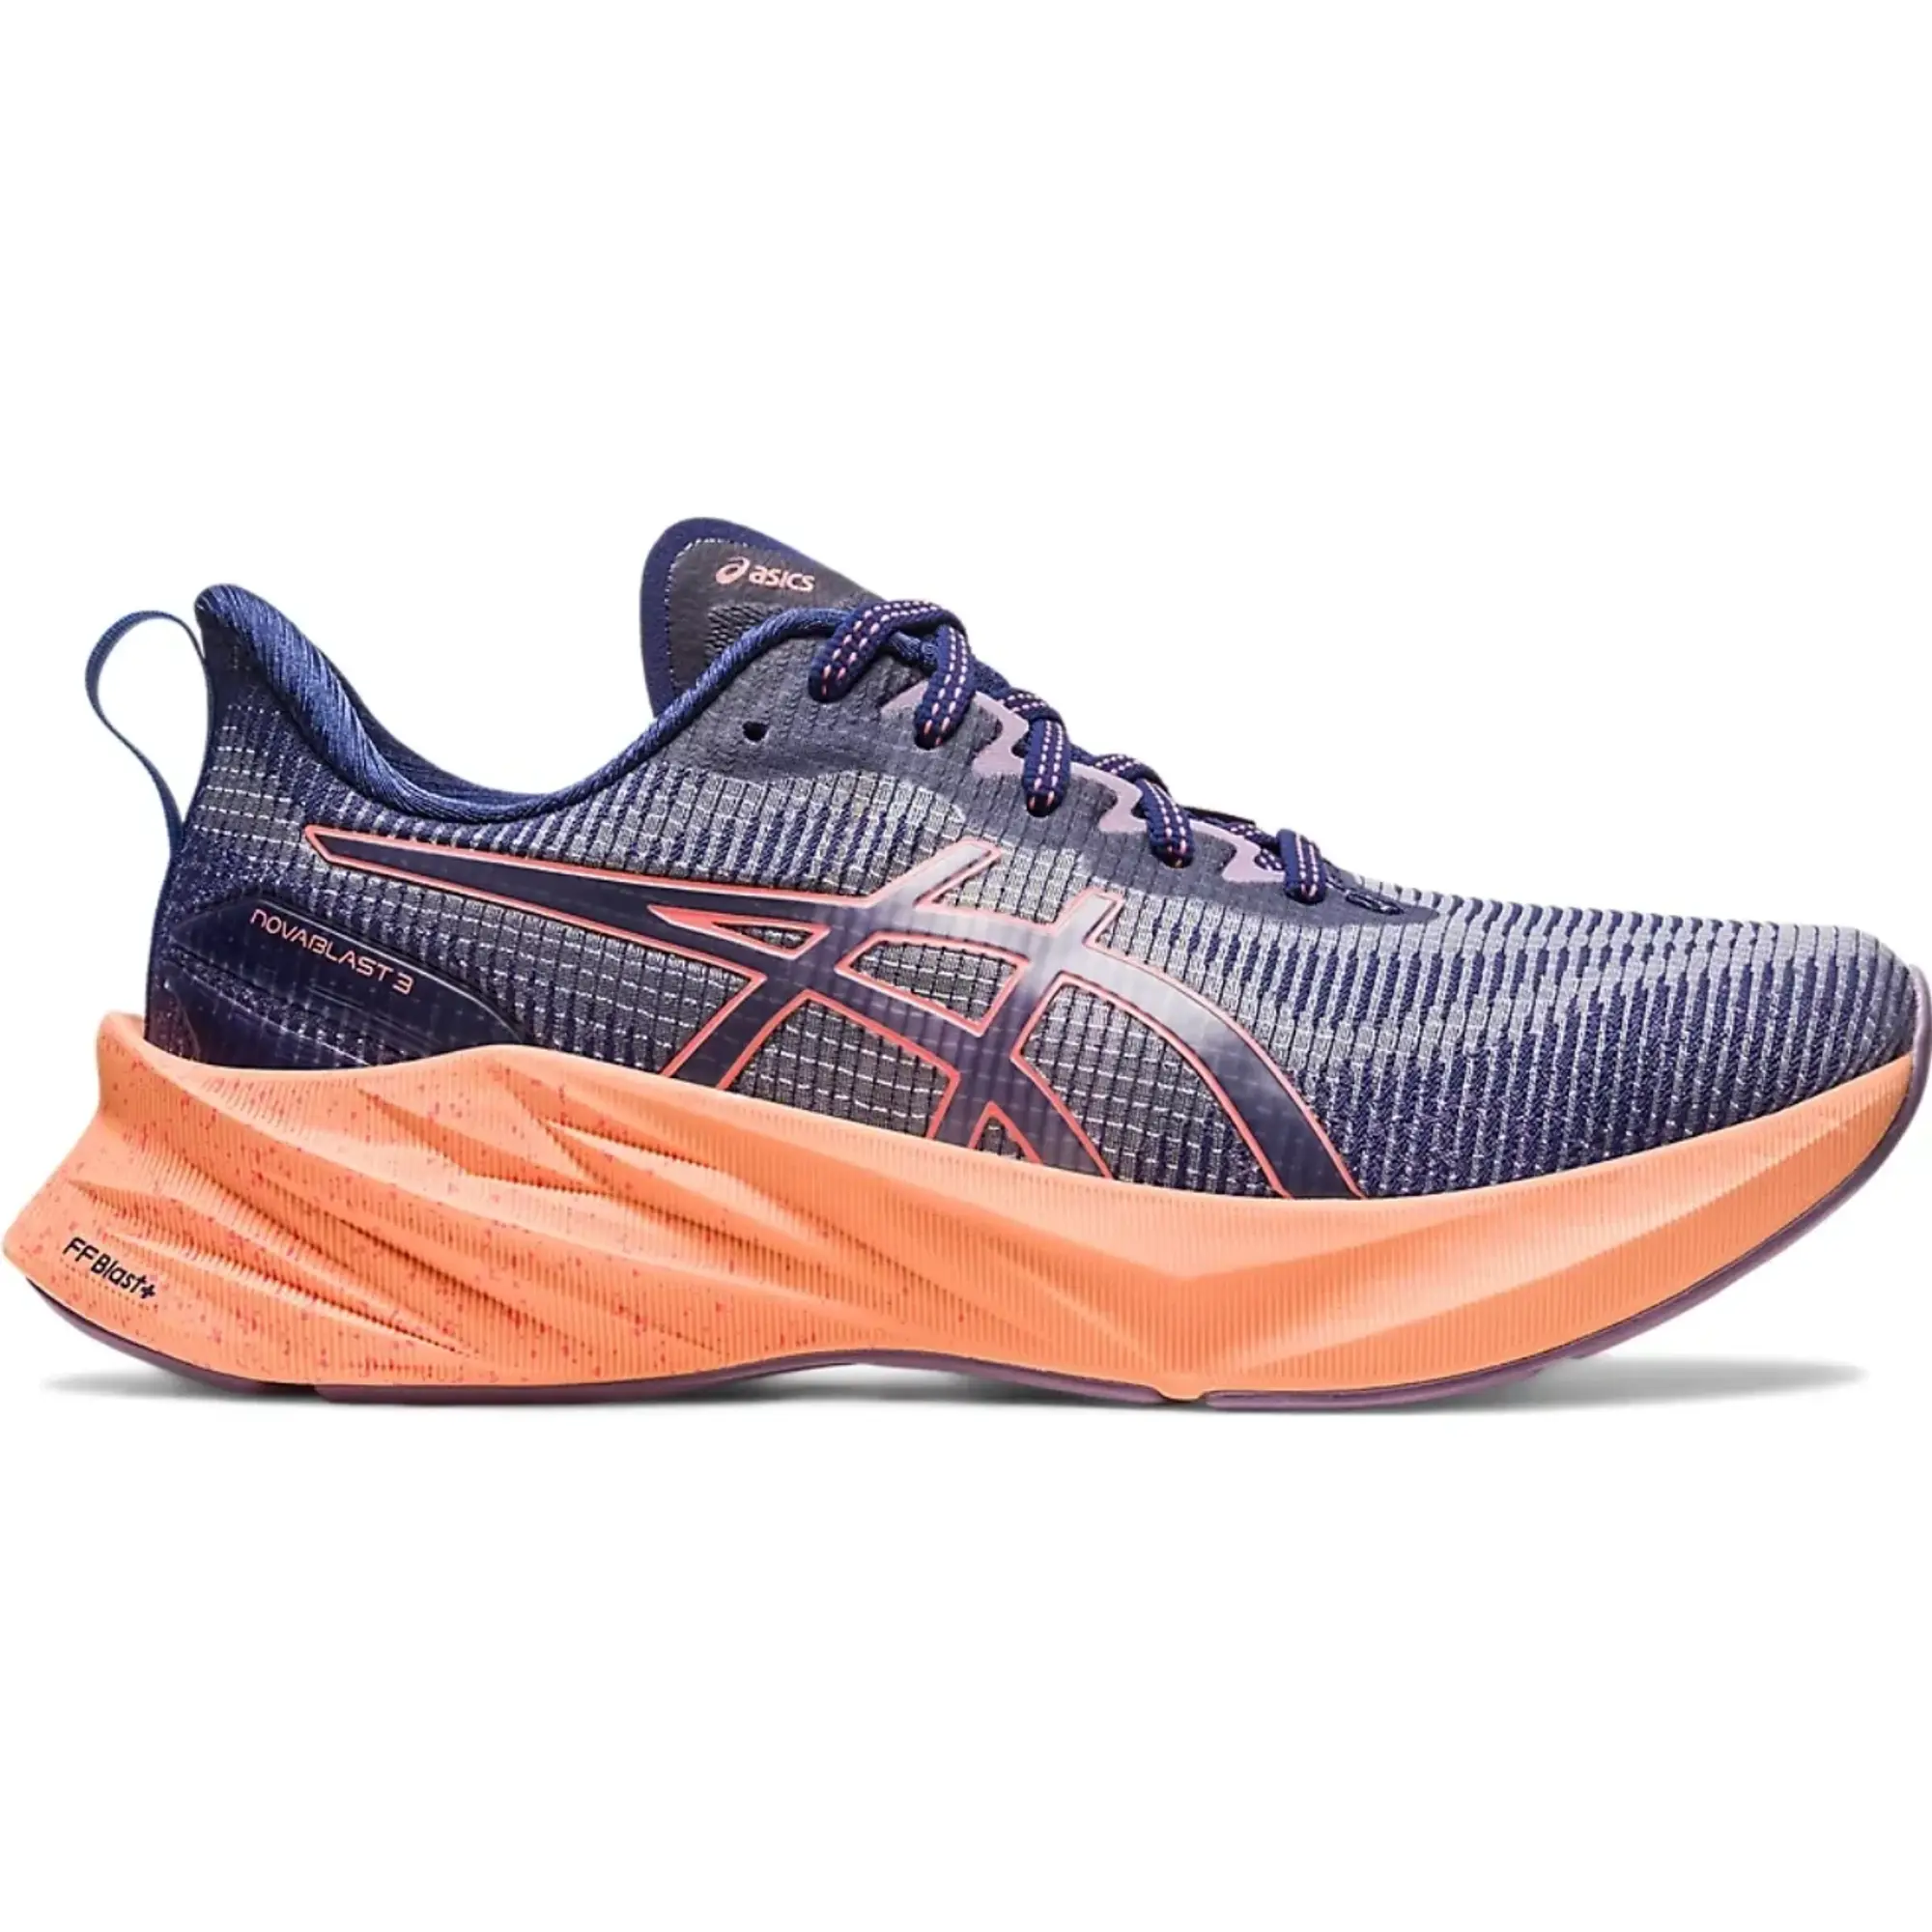 Asics Running Novablast 3 Le Chunky Trainers With Contrast Sole In Purple And Orange-Grey